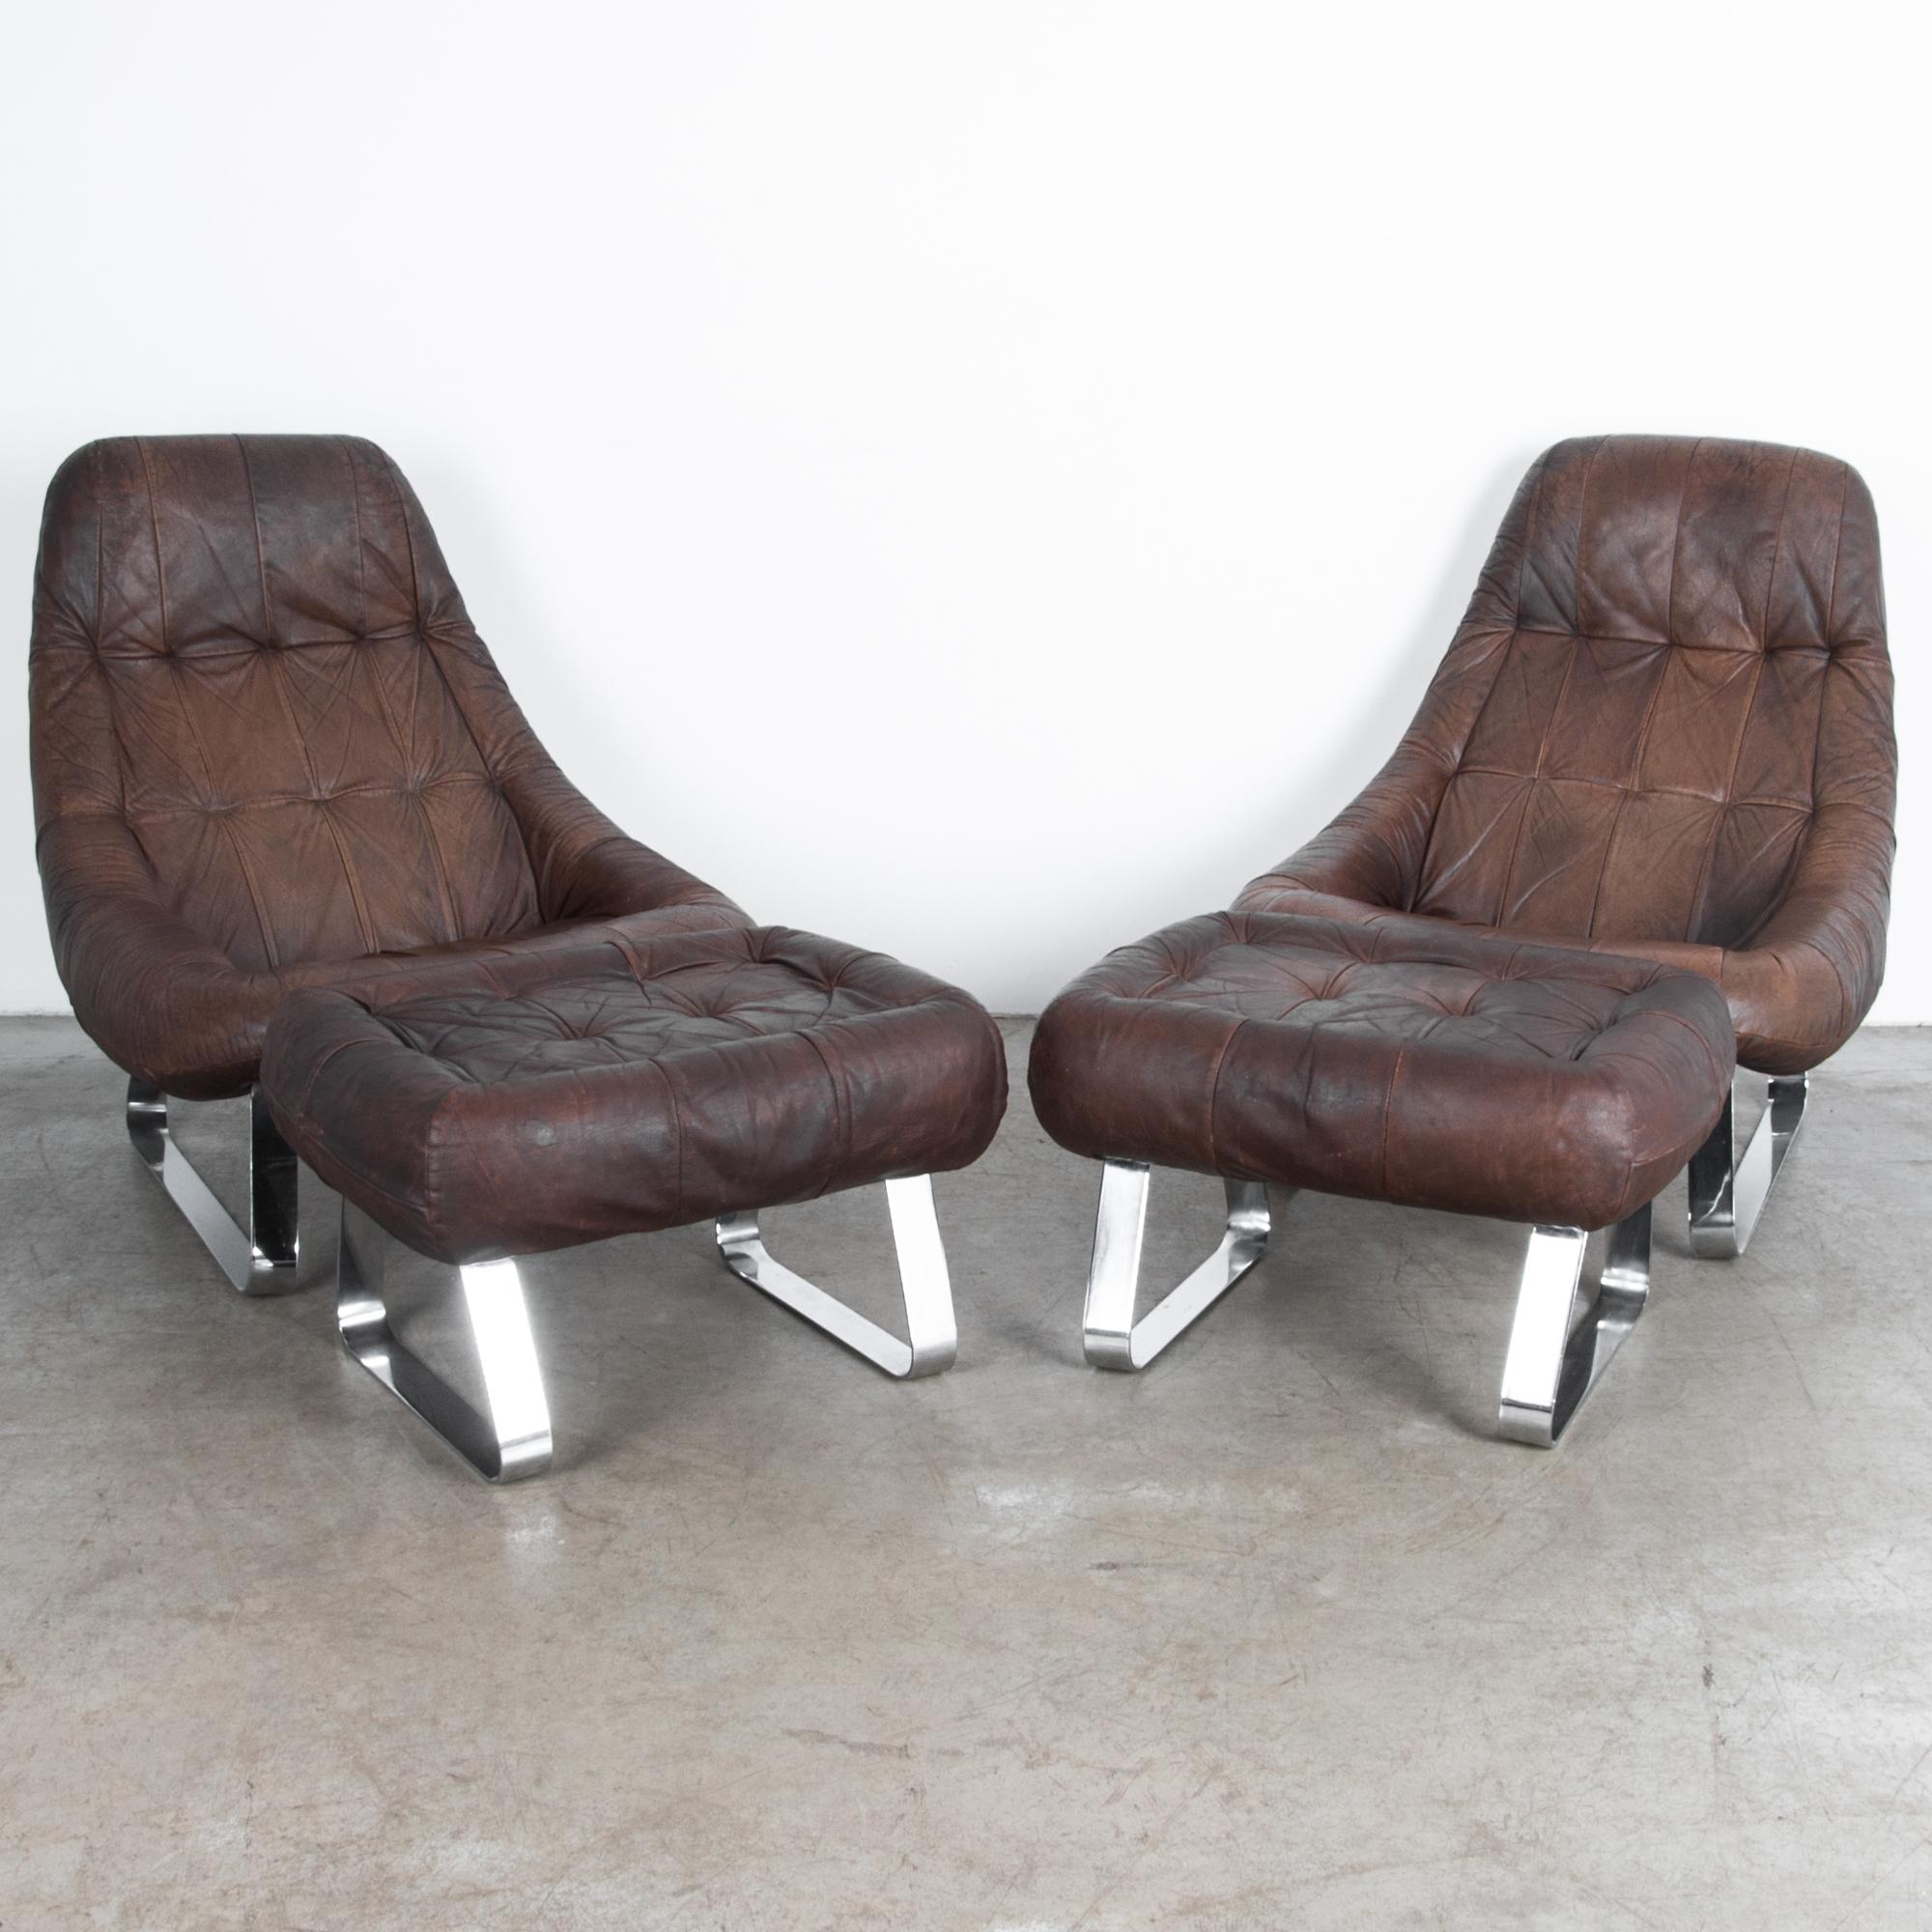 Percival Lafer Dark Brown Chrome Leather Earth Chair with Ottoman, a Pair 5